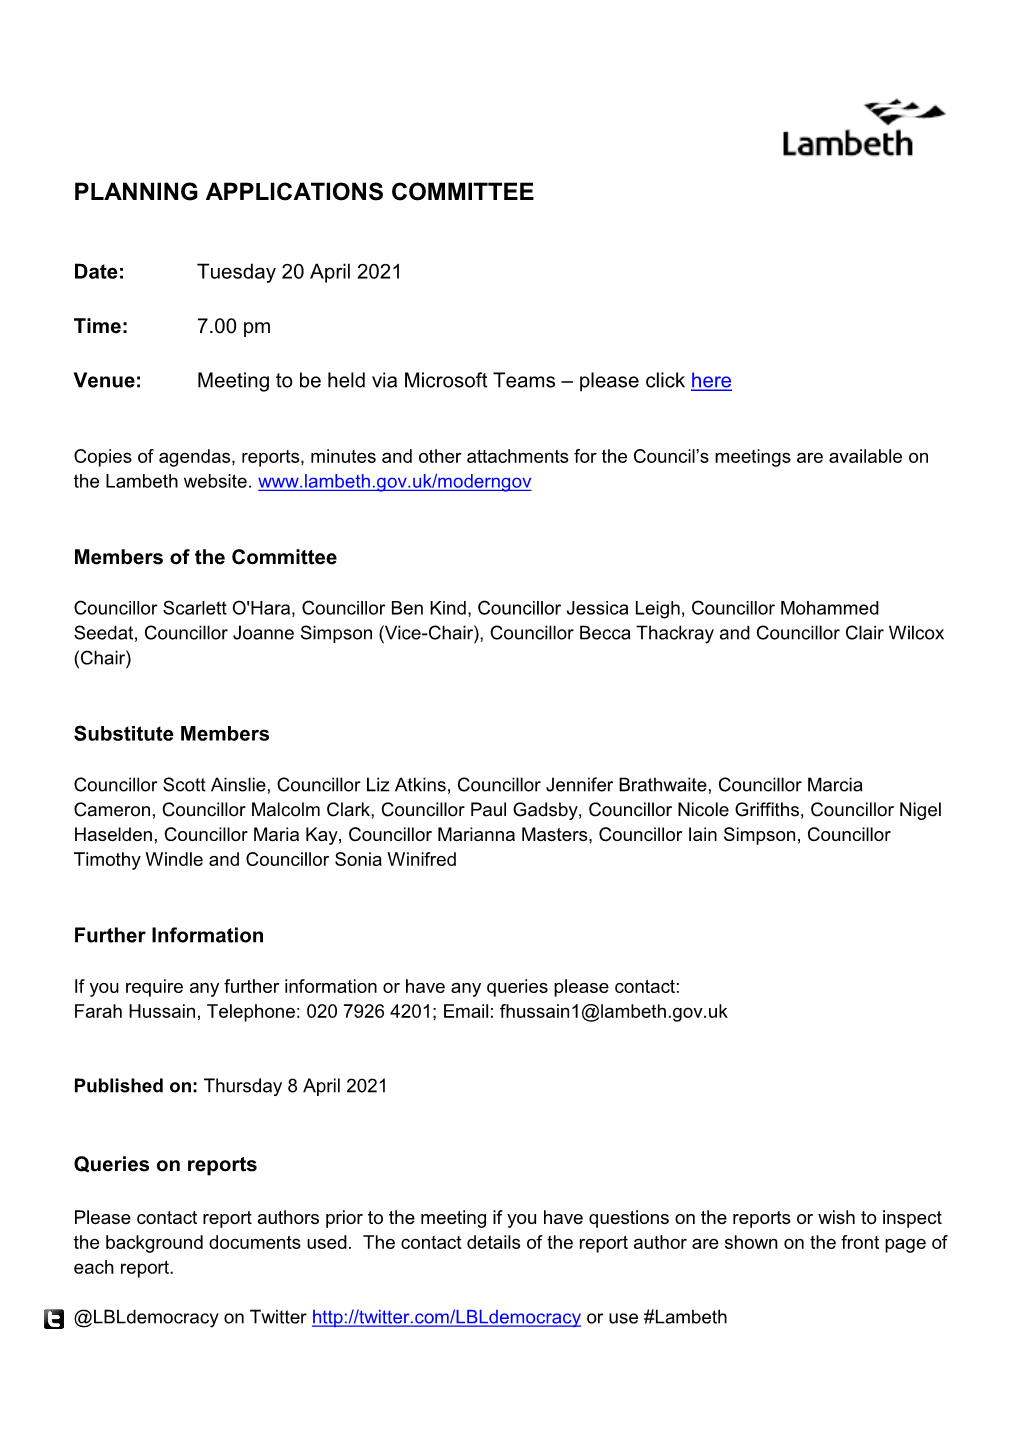 (Public Pack)Agenda Document for Planning Applications Committee, 20/04/2021 19:00